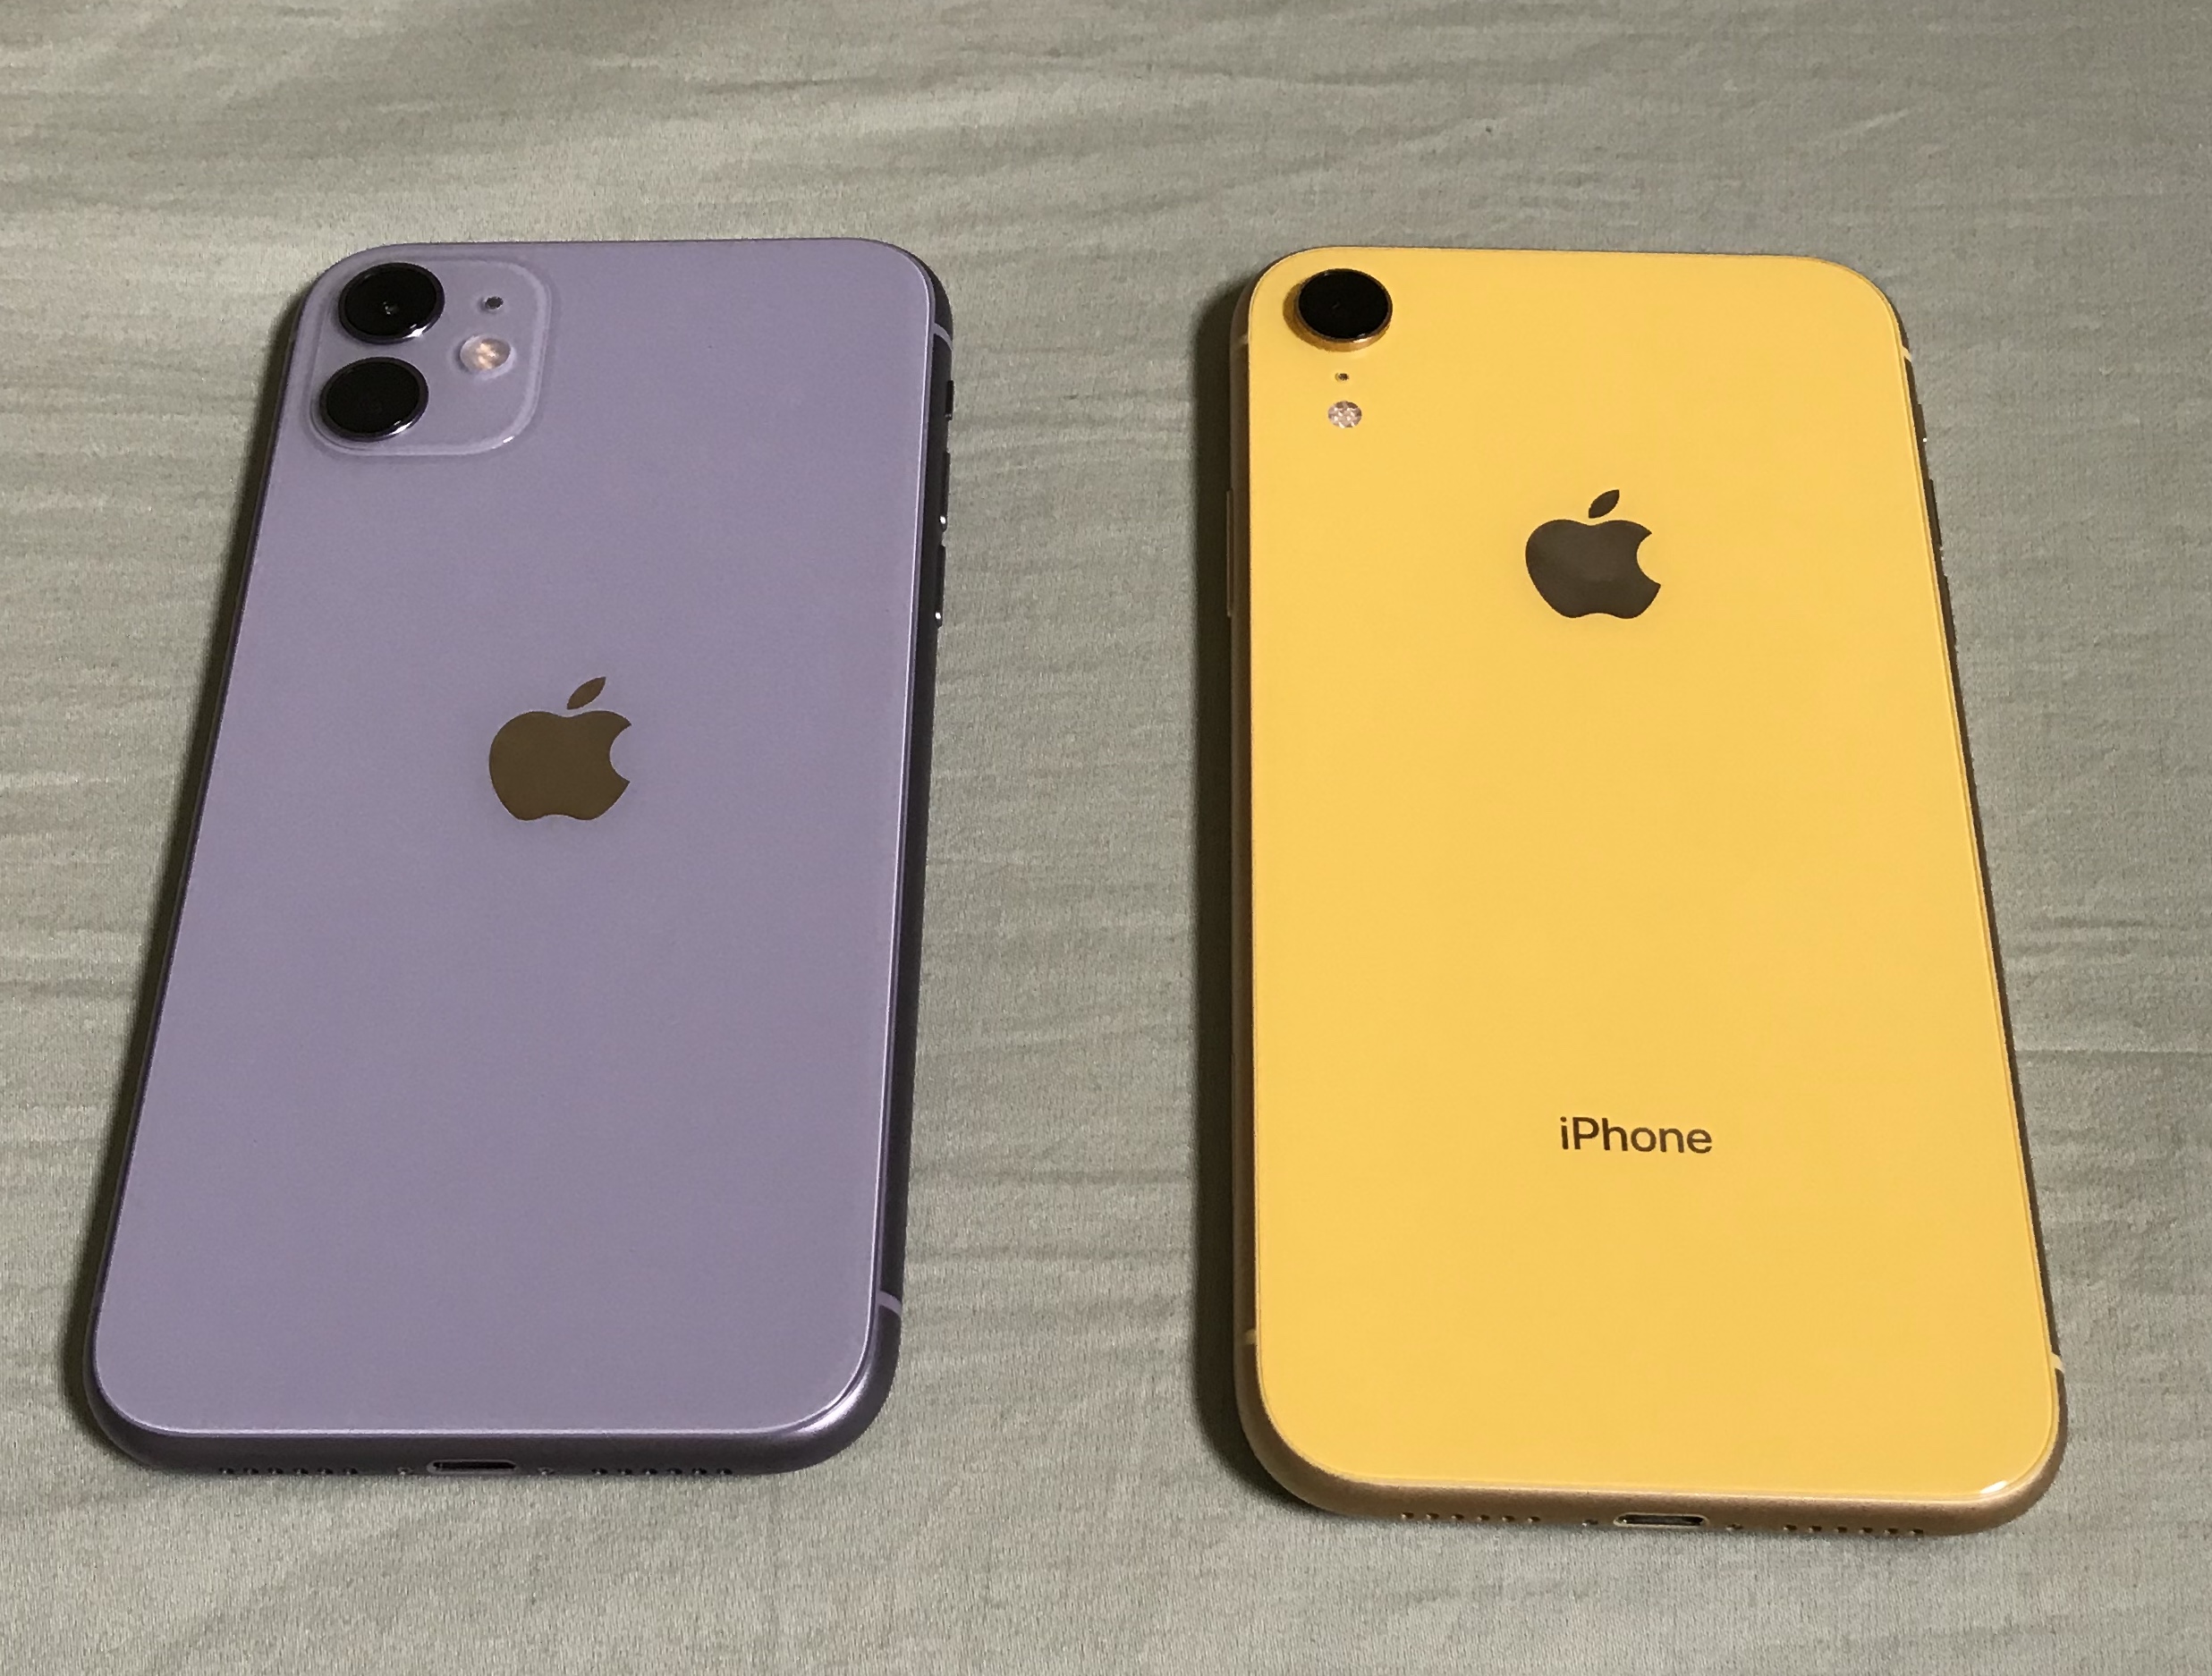 What Color Iphone 11 Are You Getting Page 12 Macrumors Forums